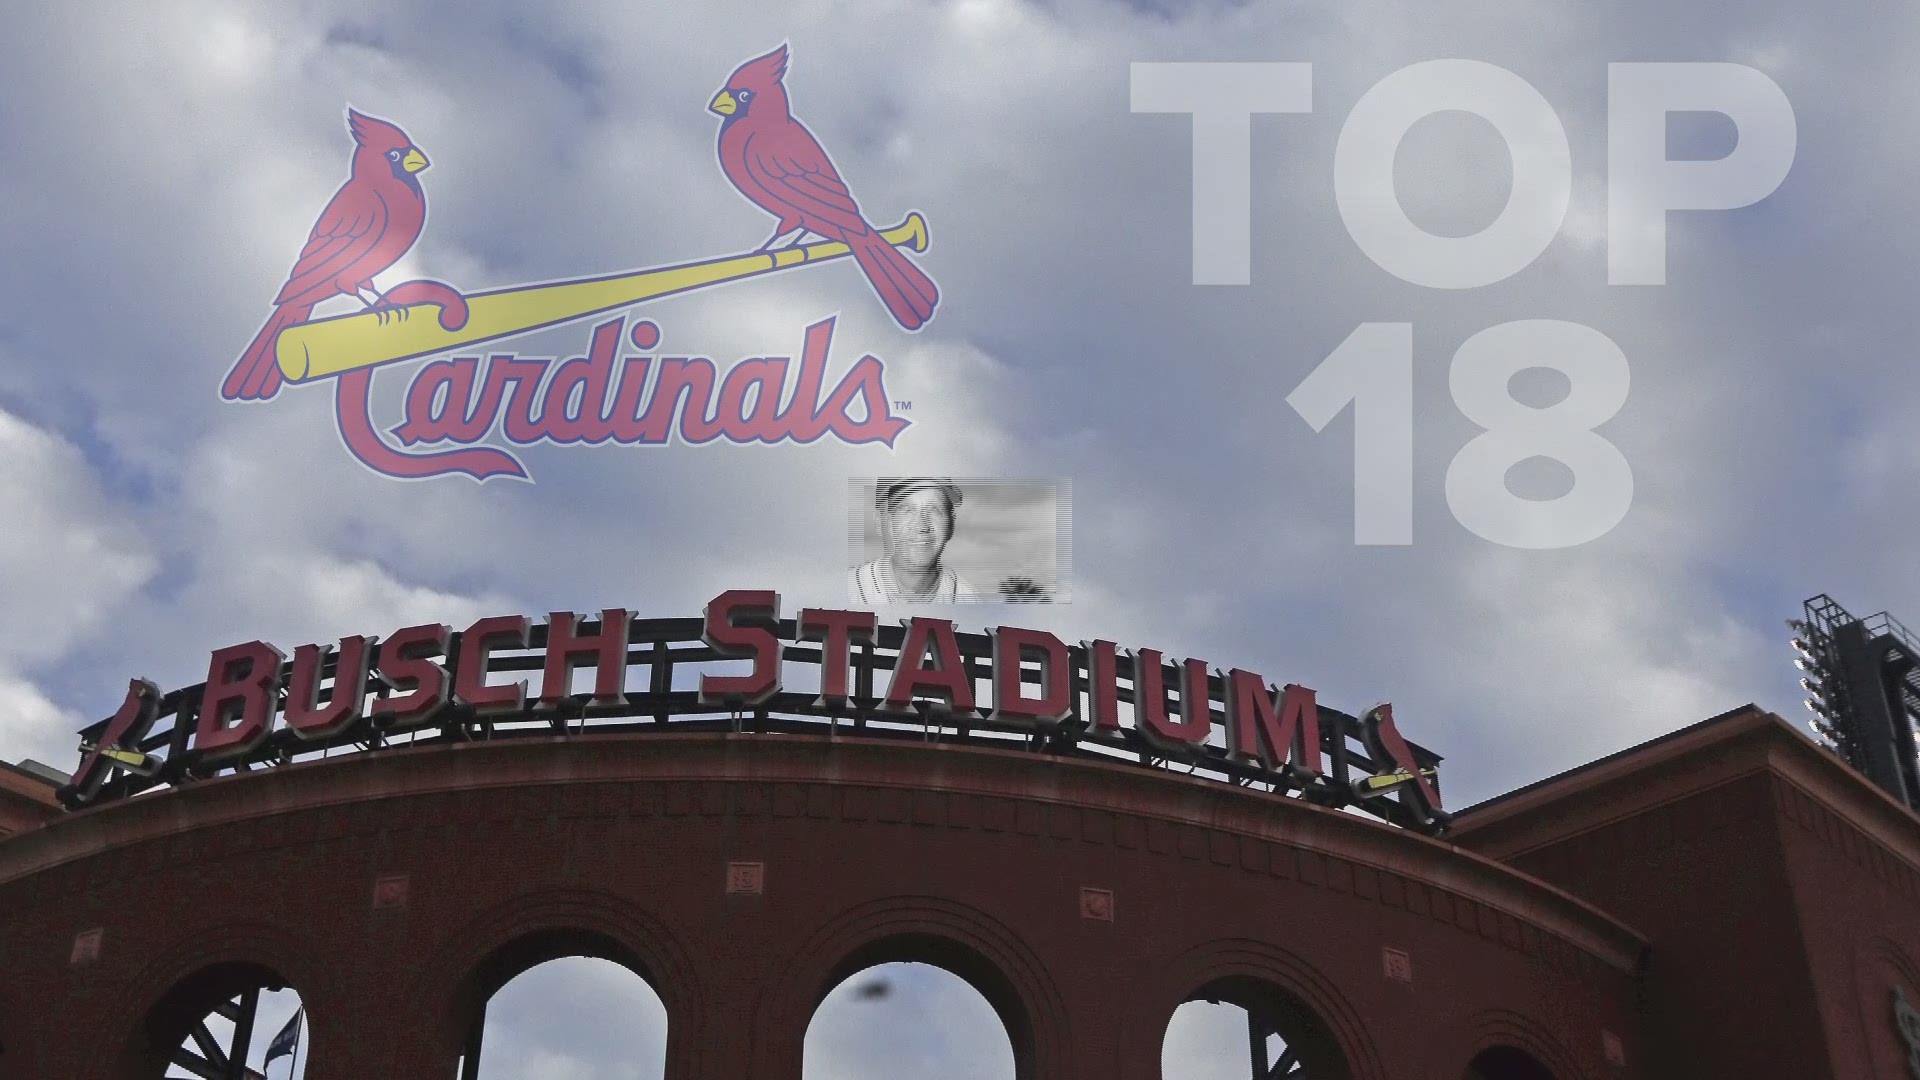 We're continuing our rankings here at 5 On Your Side, and this week, we have a big one. Frank's list of the 18 greatest St. Louis Cardinals in franchise history.